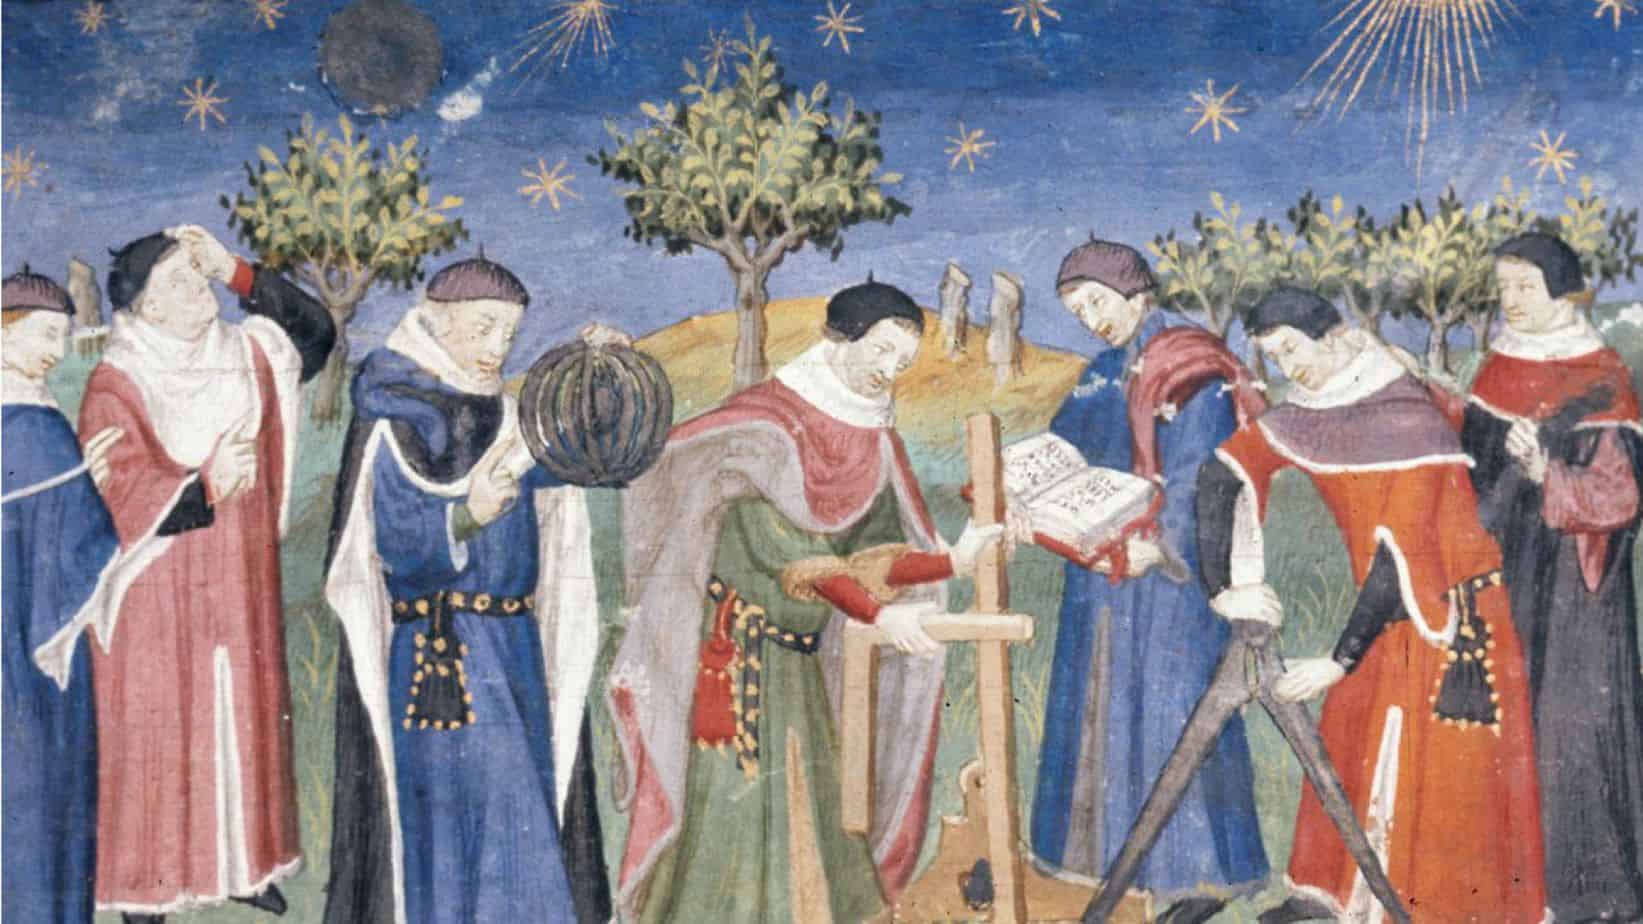 Landscape with Clerks Studying Astronomy and Geometry from the early 15th century